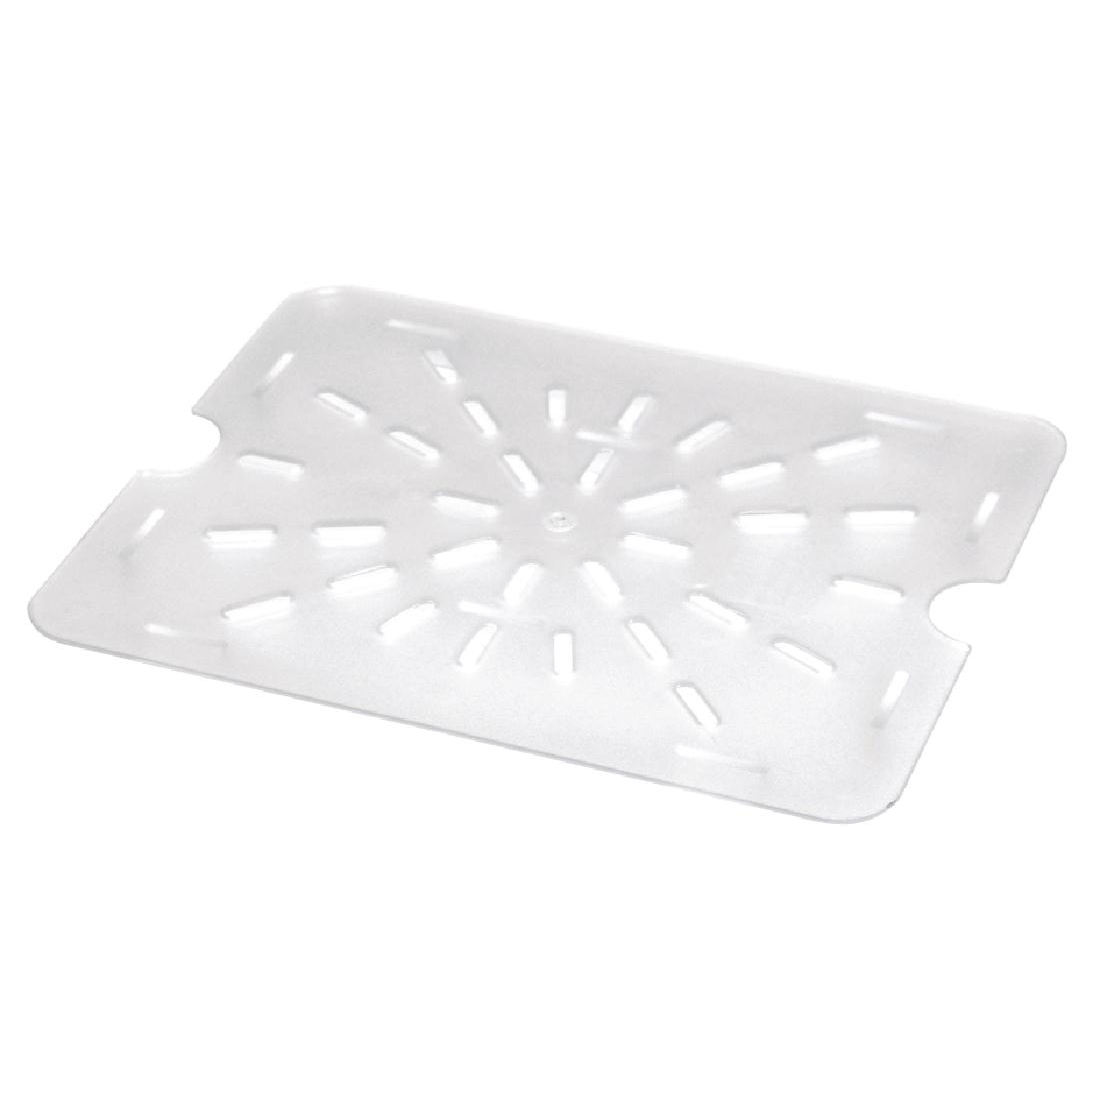 Vogue Drainer Plates for GN 1/2 Polycarbonate Gastronorm Pan